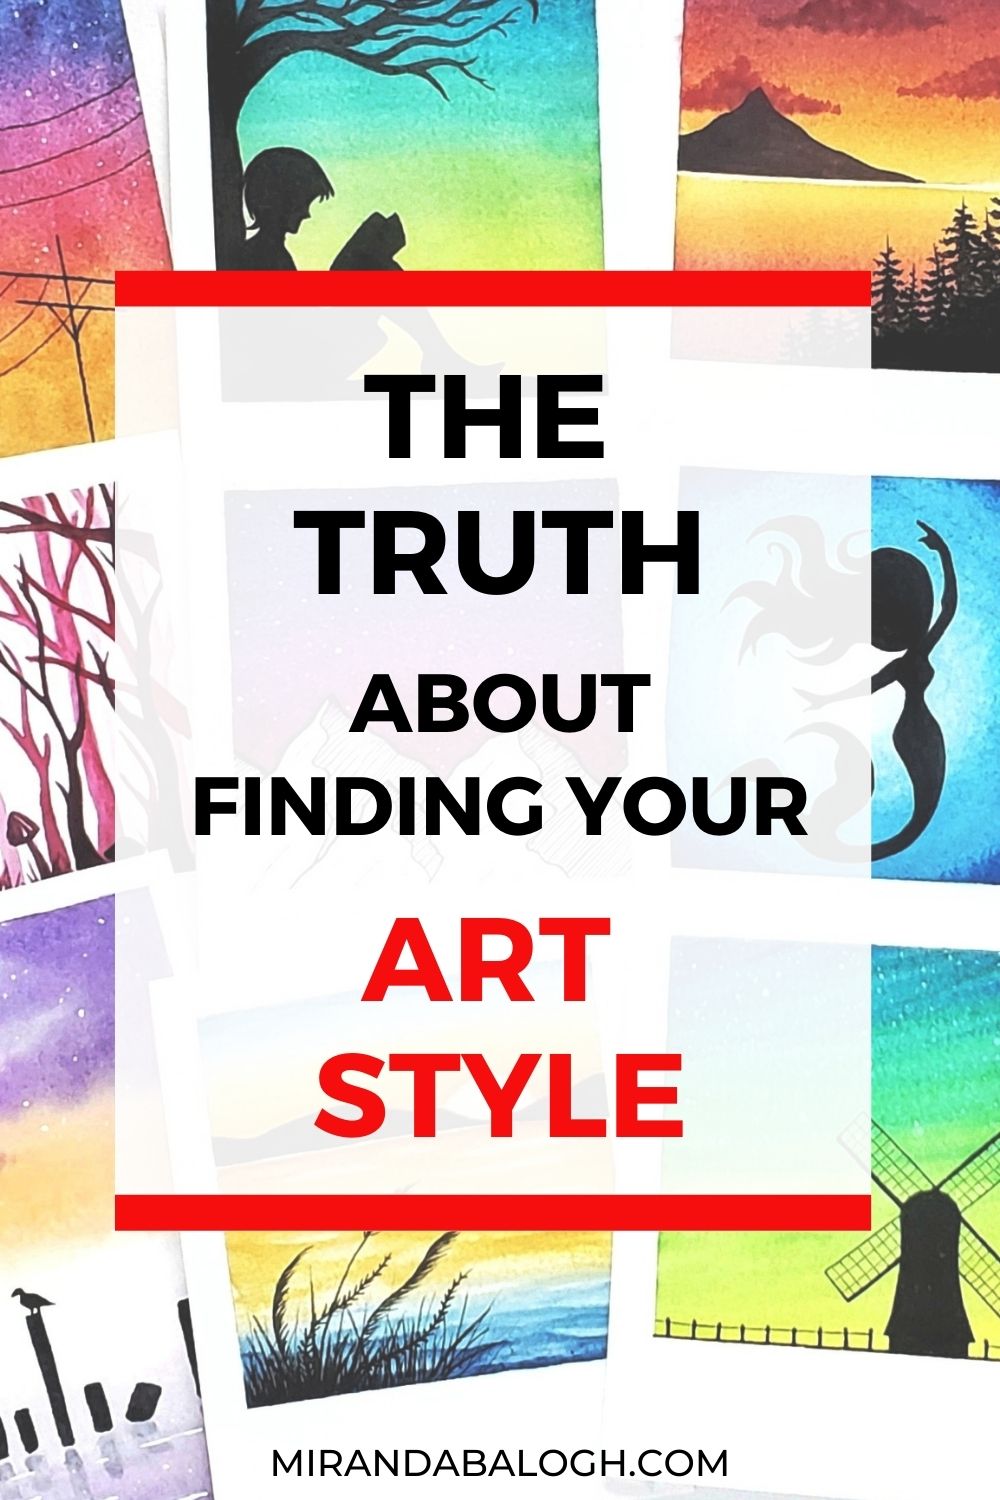 The Truth About Finding Your Art Style (Find Out How) | Miranda Balogh